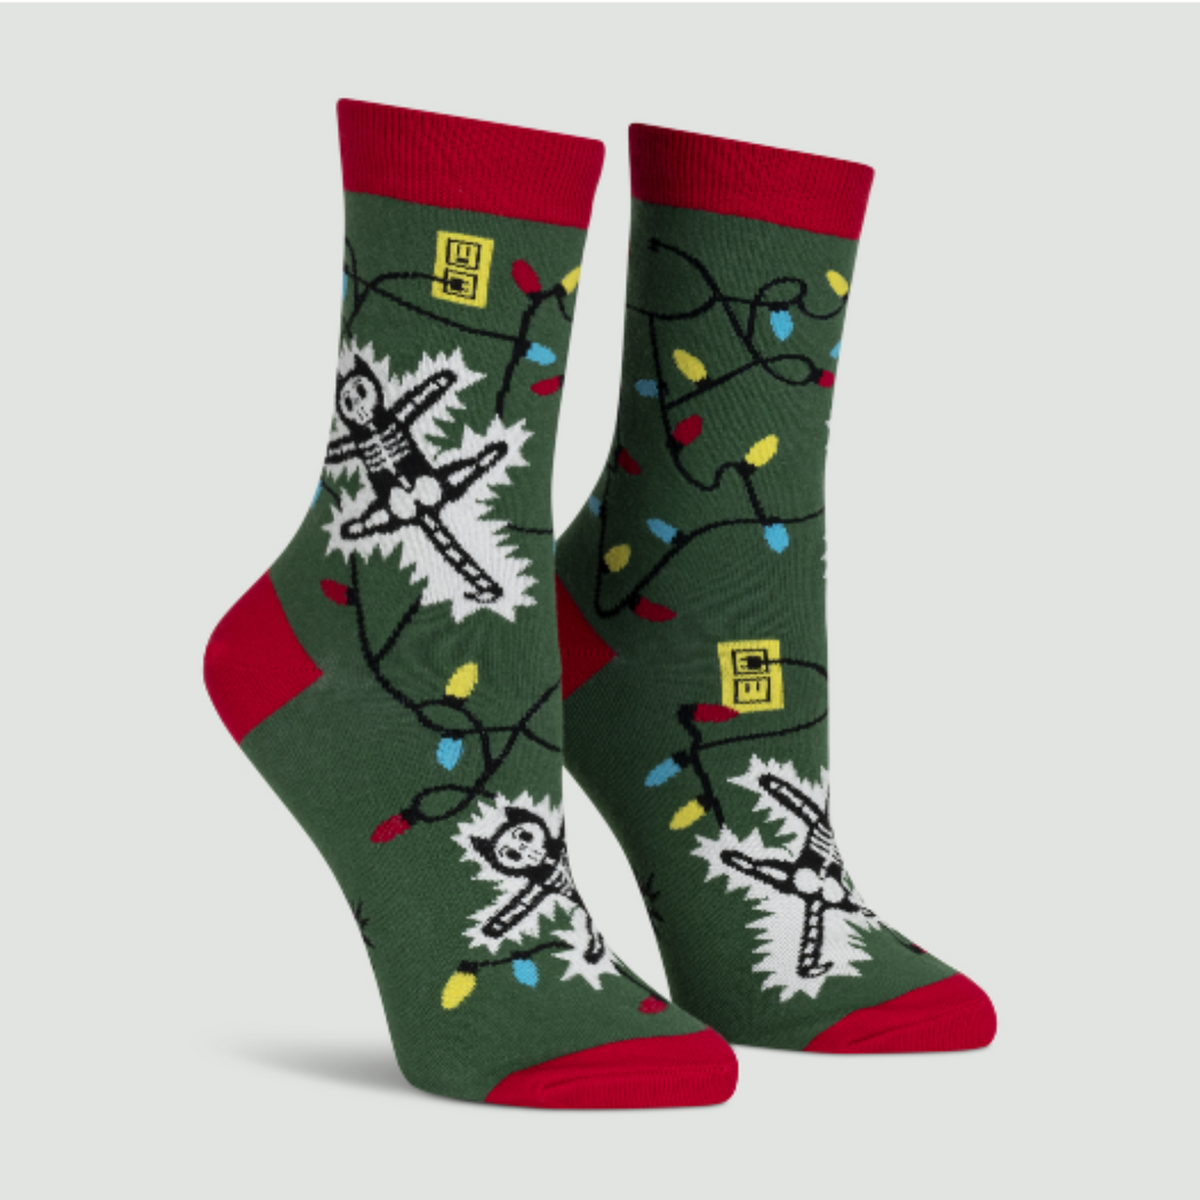 Sock It To Me Eating Light This Holiday (GLOWS IN THE DARK) women&#39;s and men&#39;s crew socks featuring green sock with red cuff, heel, and toe with cartoon cat being electrocuted by Christmas lights. Socks shown on display feet. 